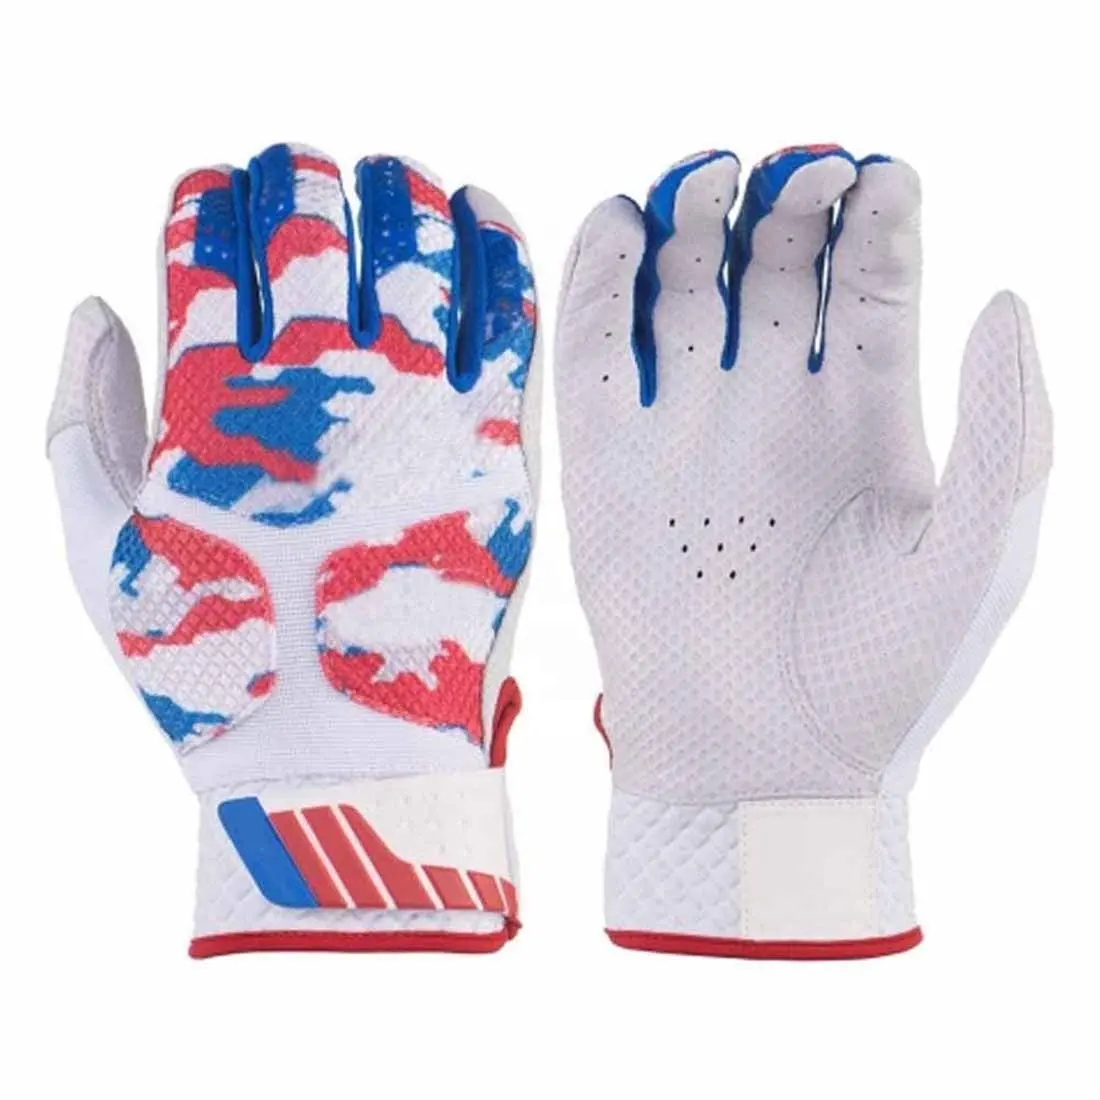 Top Selling With Cheap Price Quick Dry And Durable Softball Baseball Gloves Batting Gloves